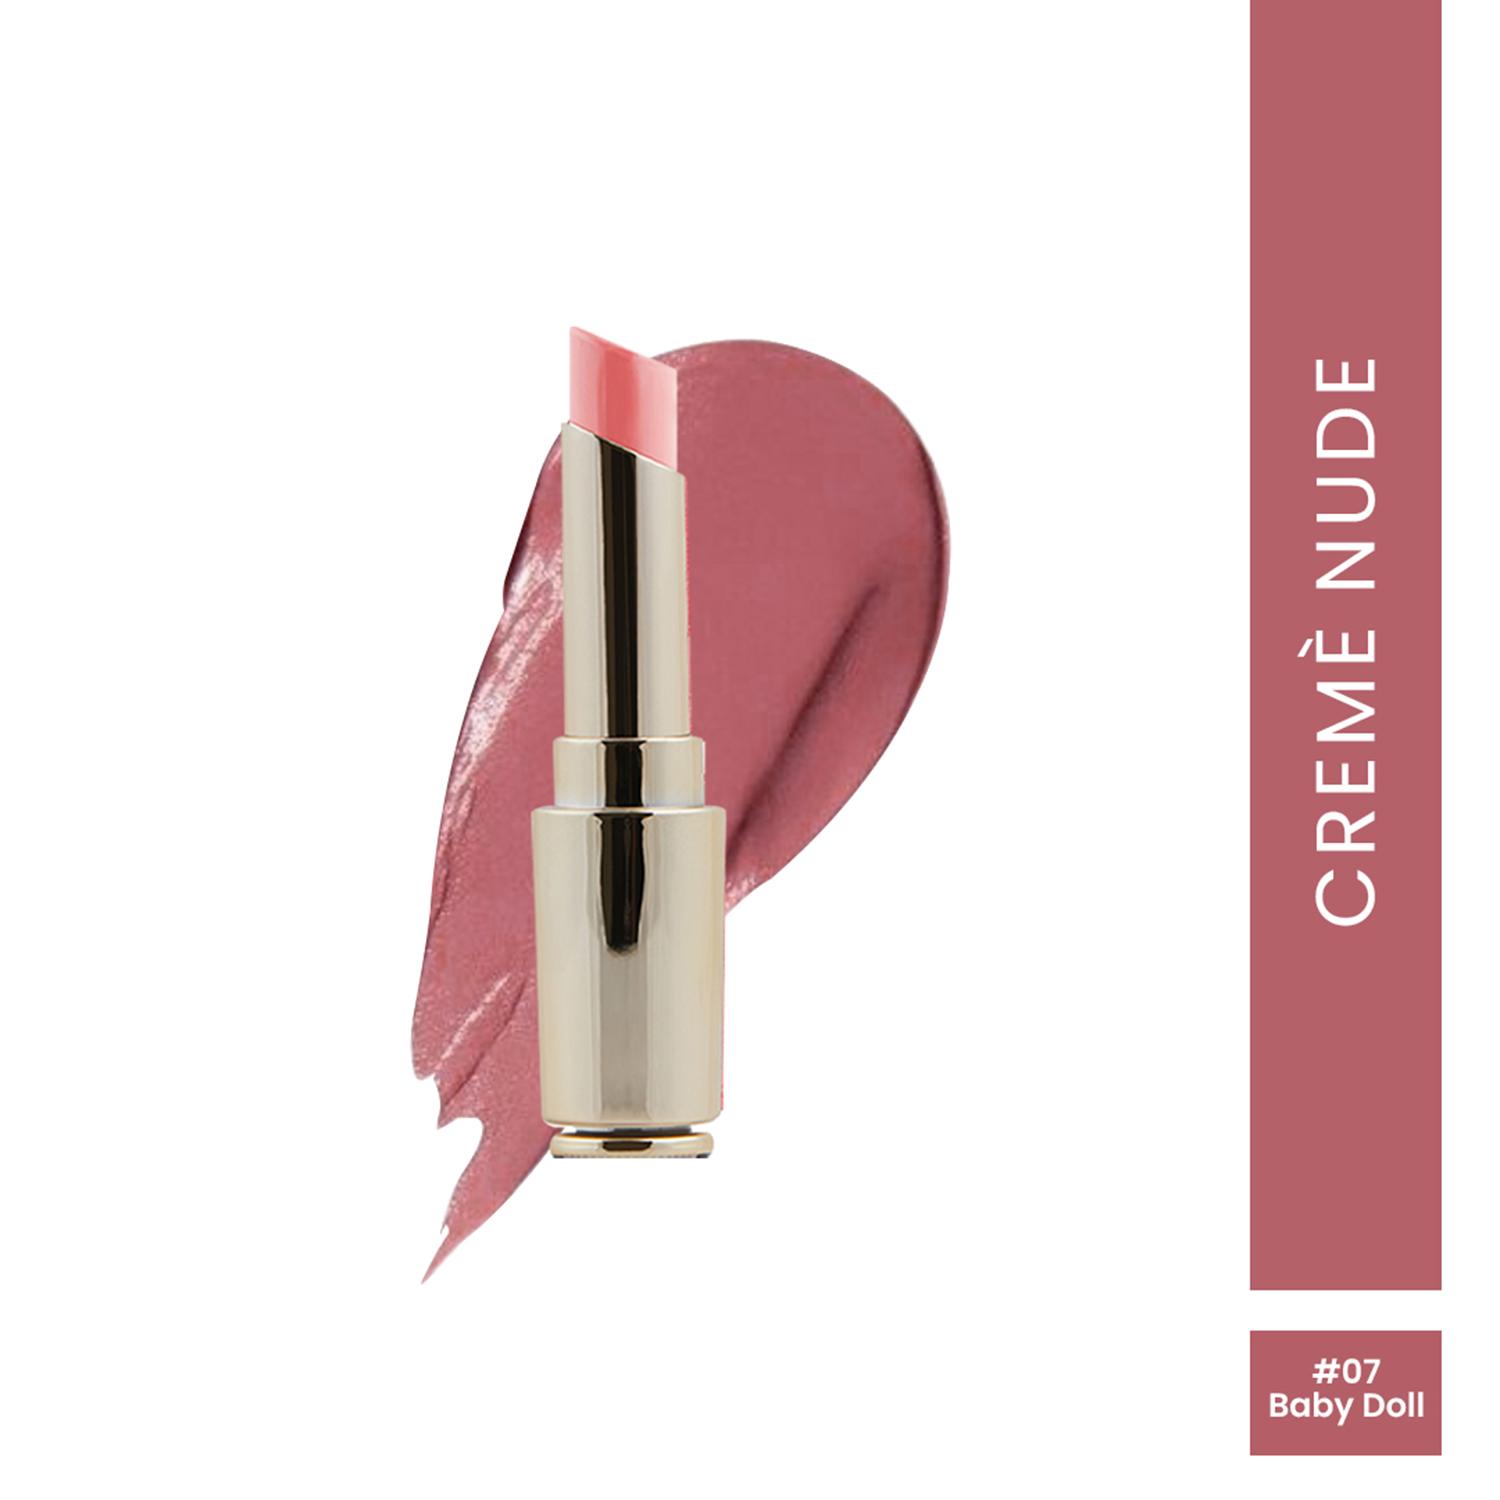 Charmacy Milano Flattering Nude Lipstick - 07 Baby Doll (3.8g)